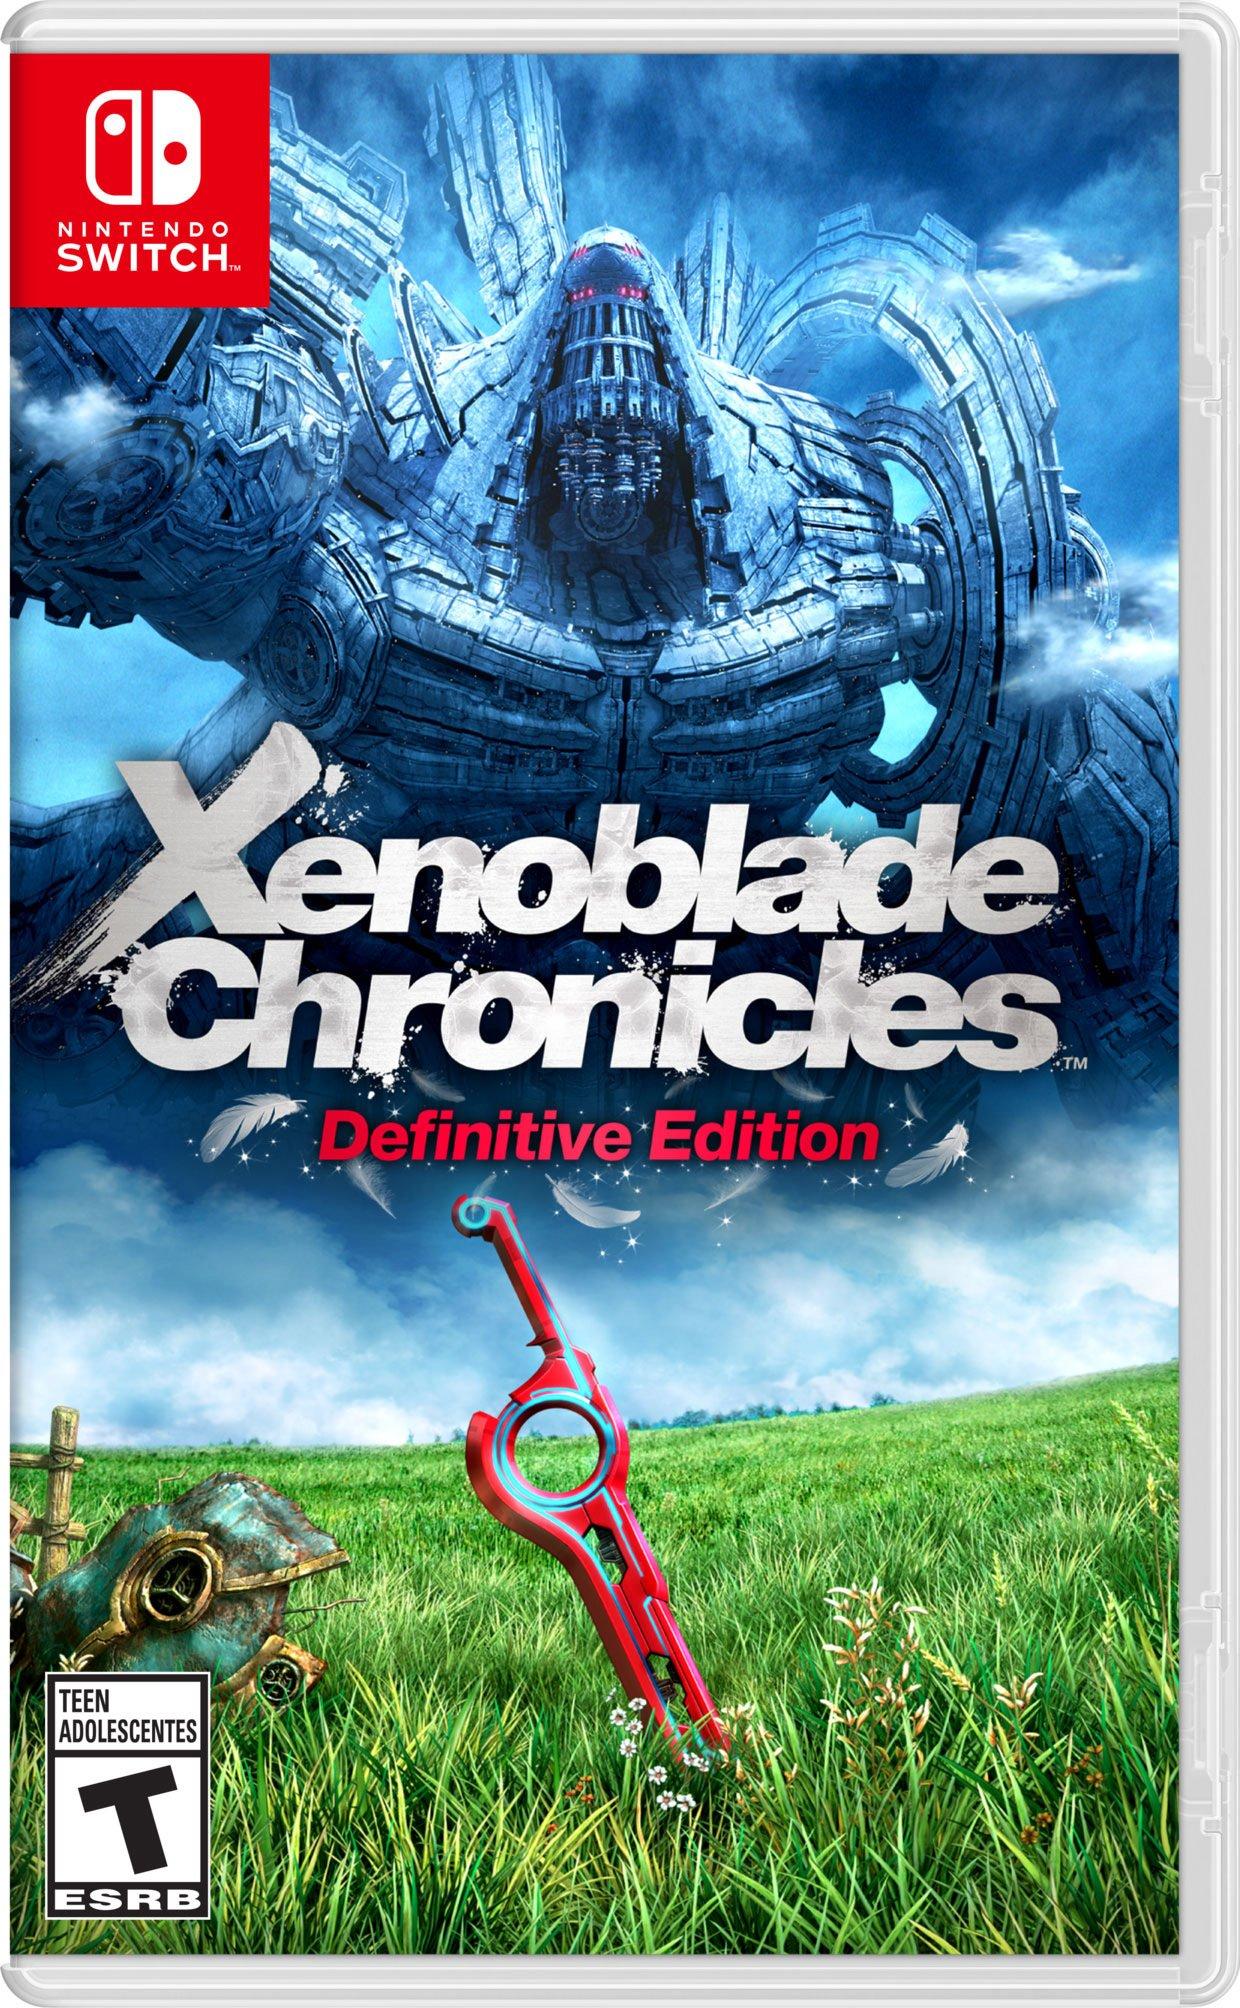 xenoblade chronicles switch release